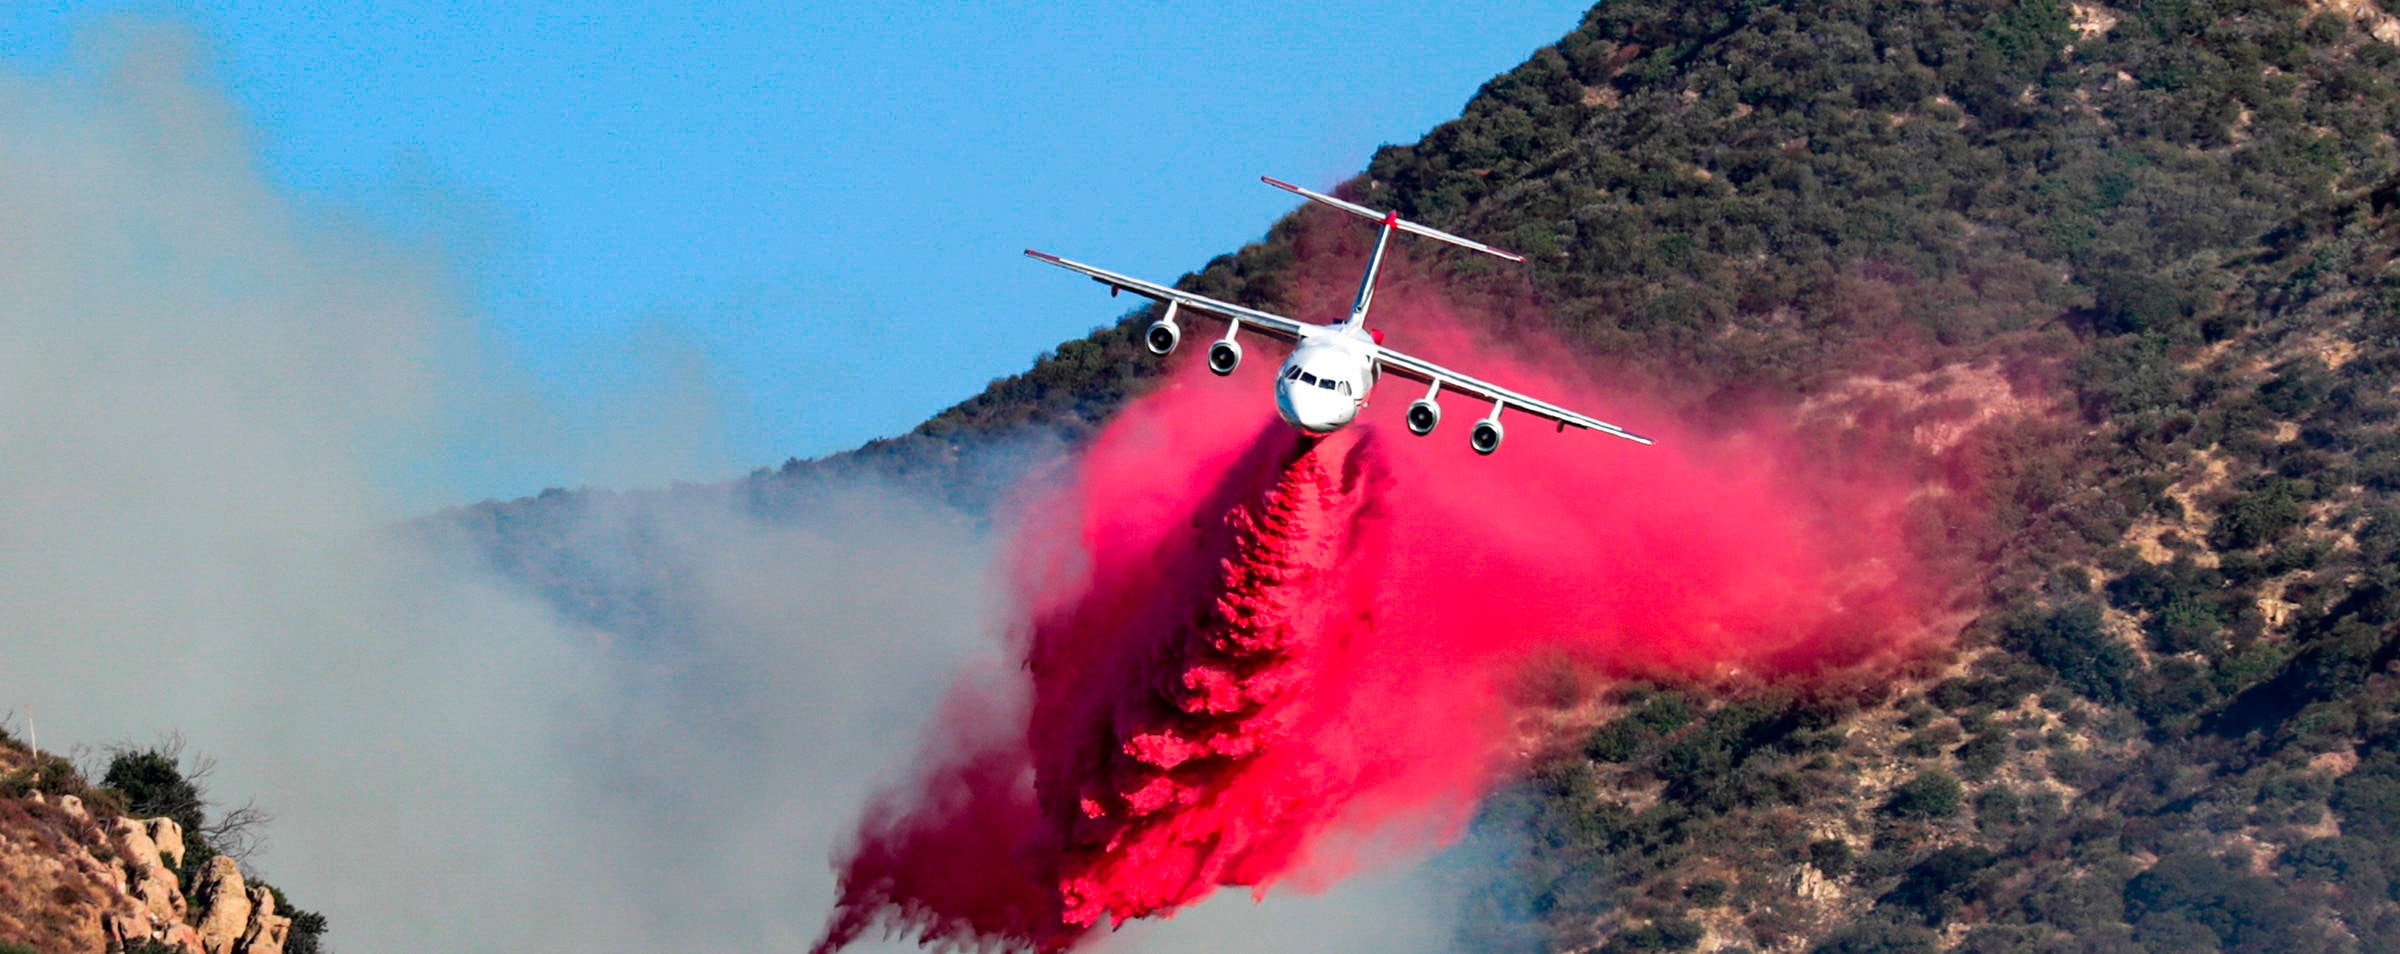 Saddleridge Fire Scorches 4000 Acres In LA County, Thousands Evacuated